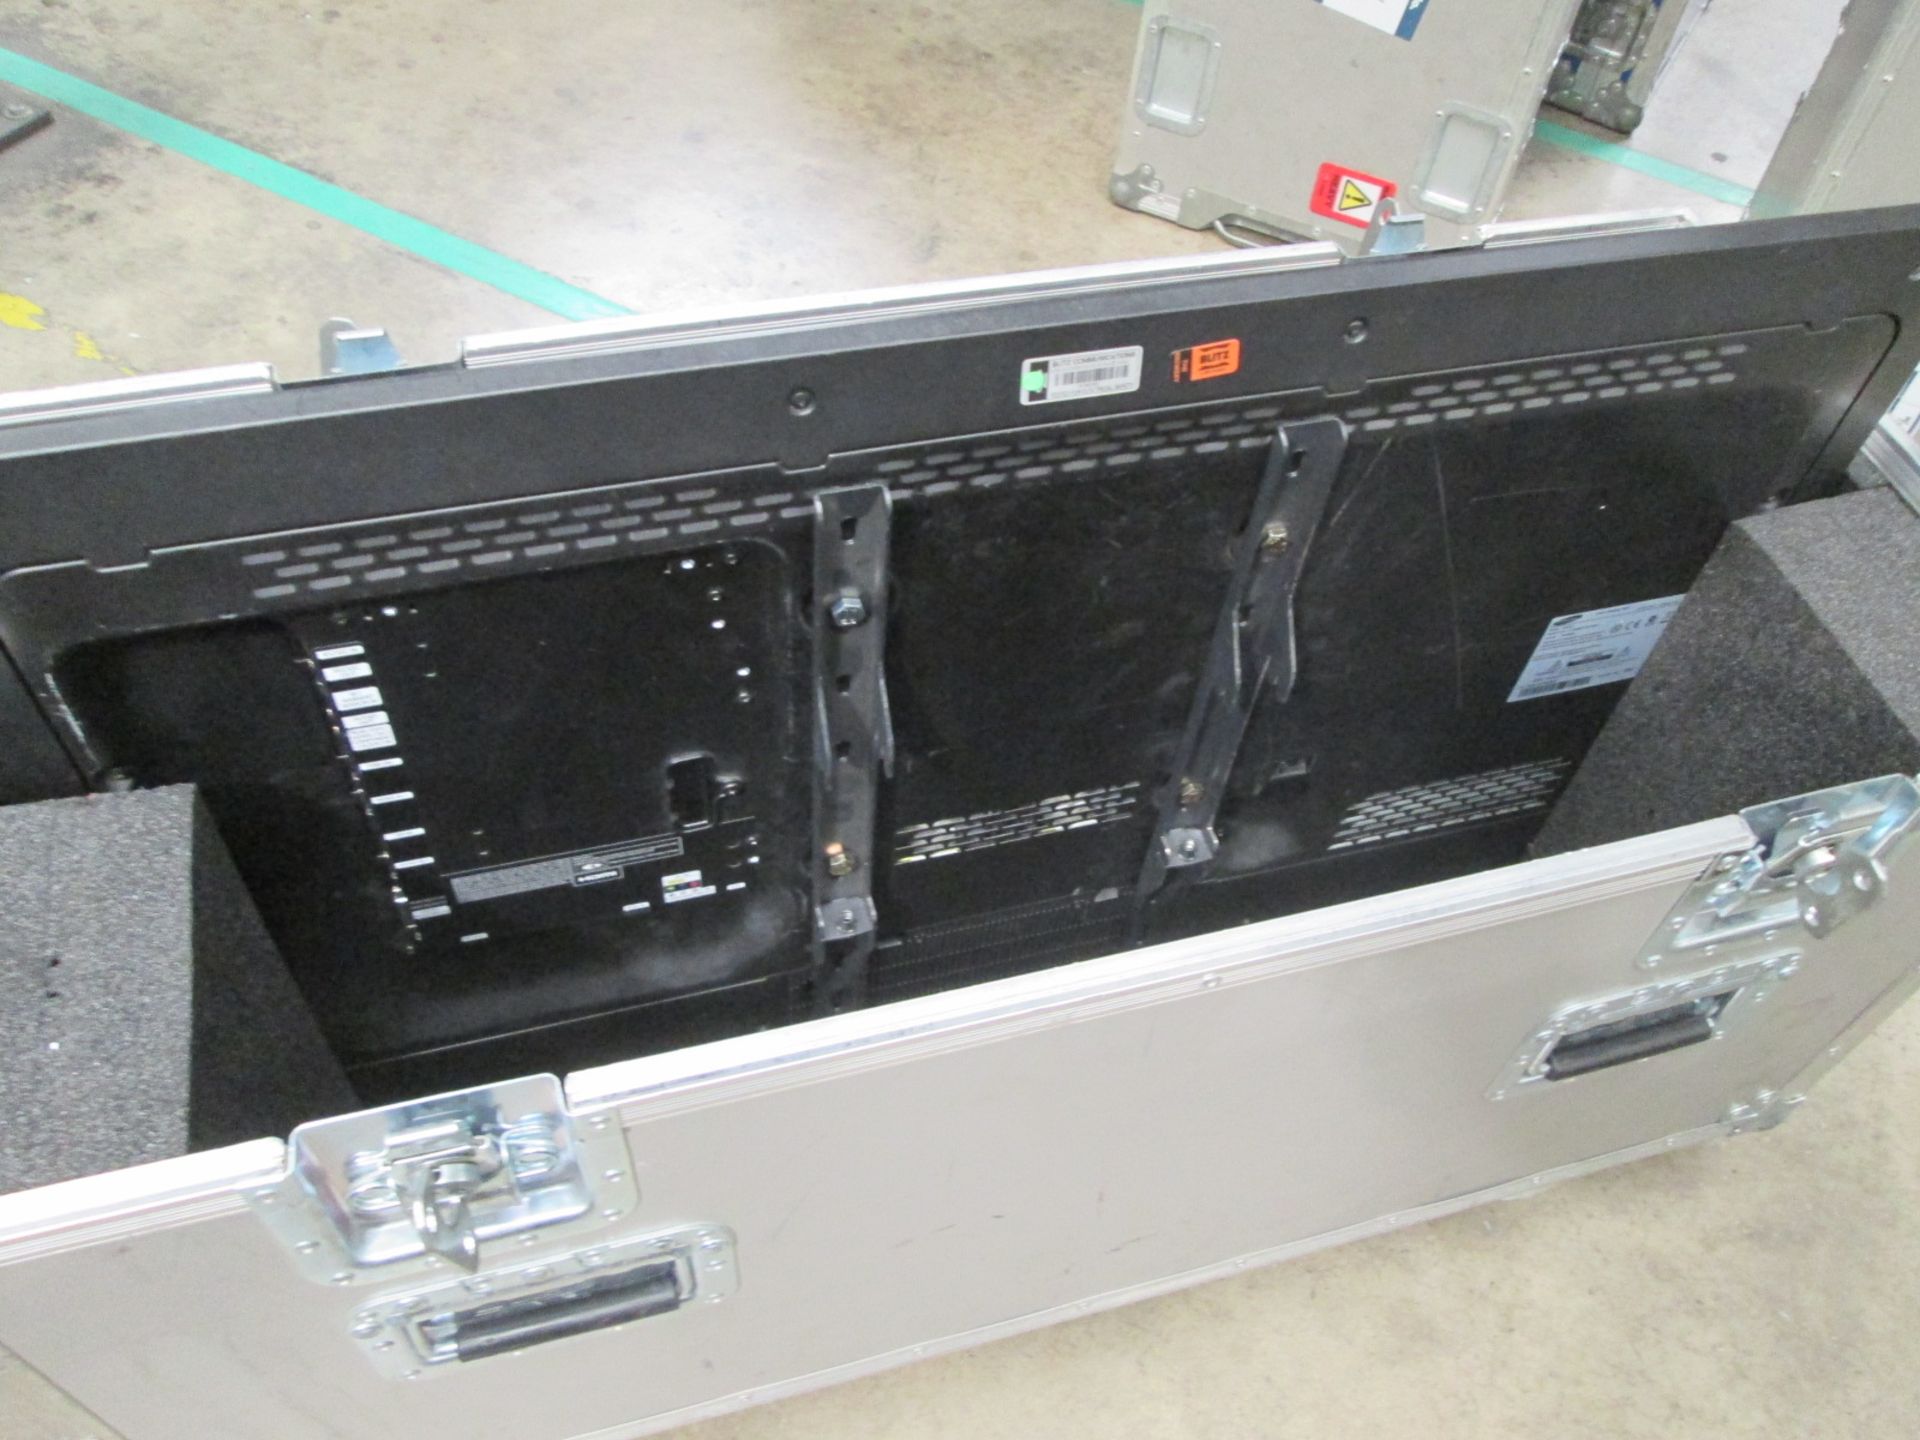 Samsung ME40C 40" Colour Display Monitor, With backplate, remote and power supply, In flight case. - Image 2 of 4